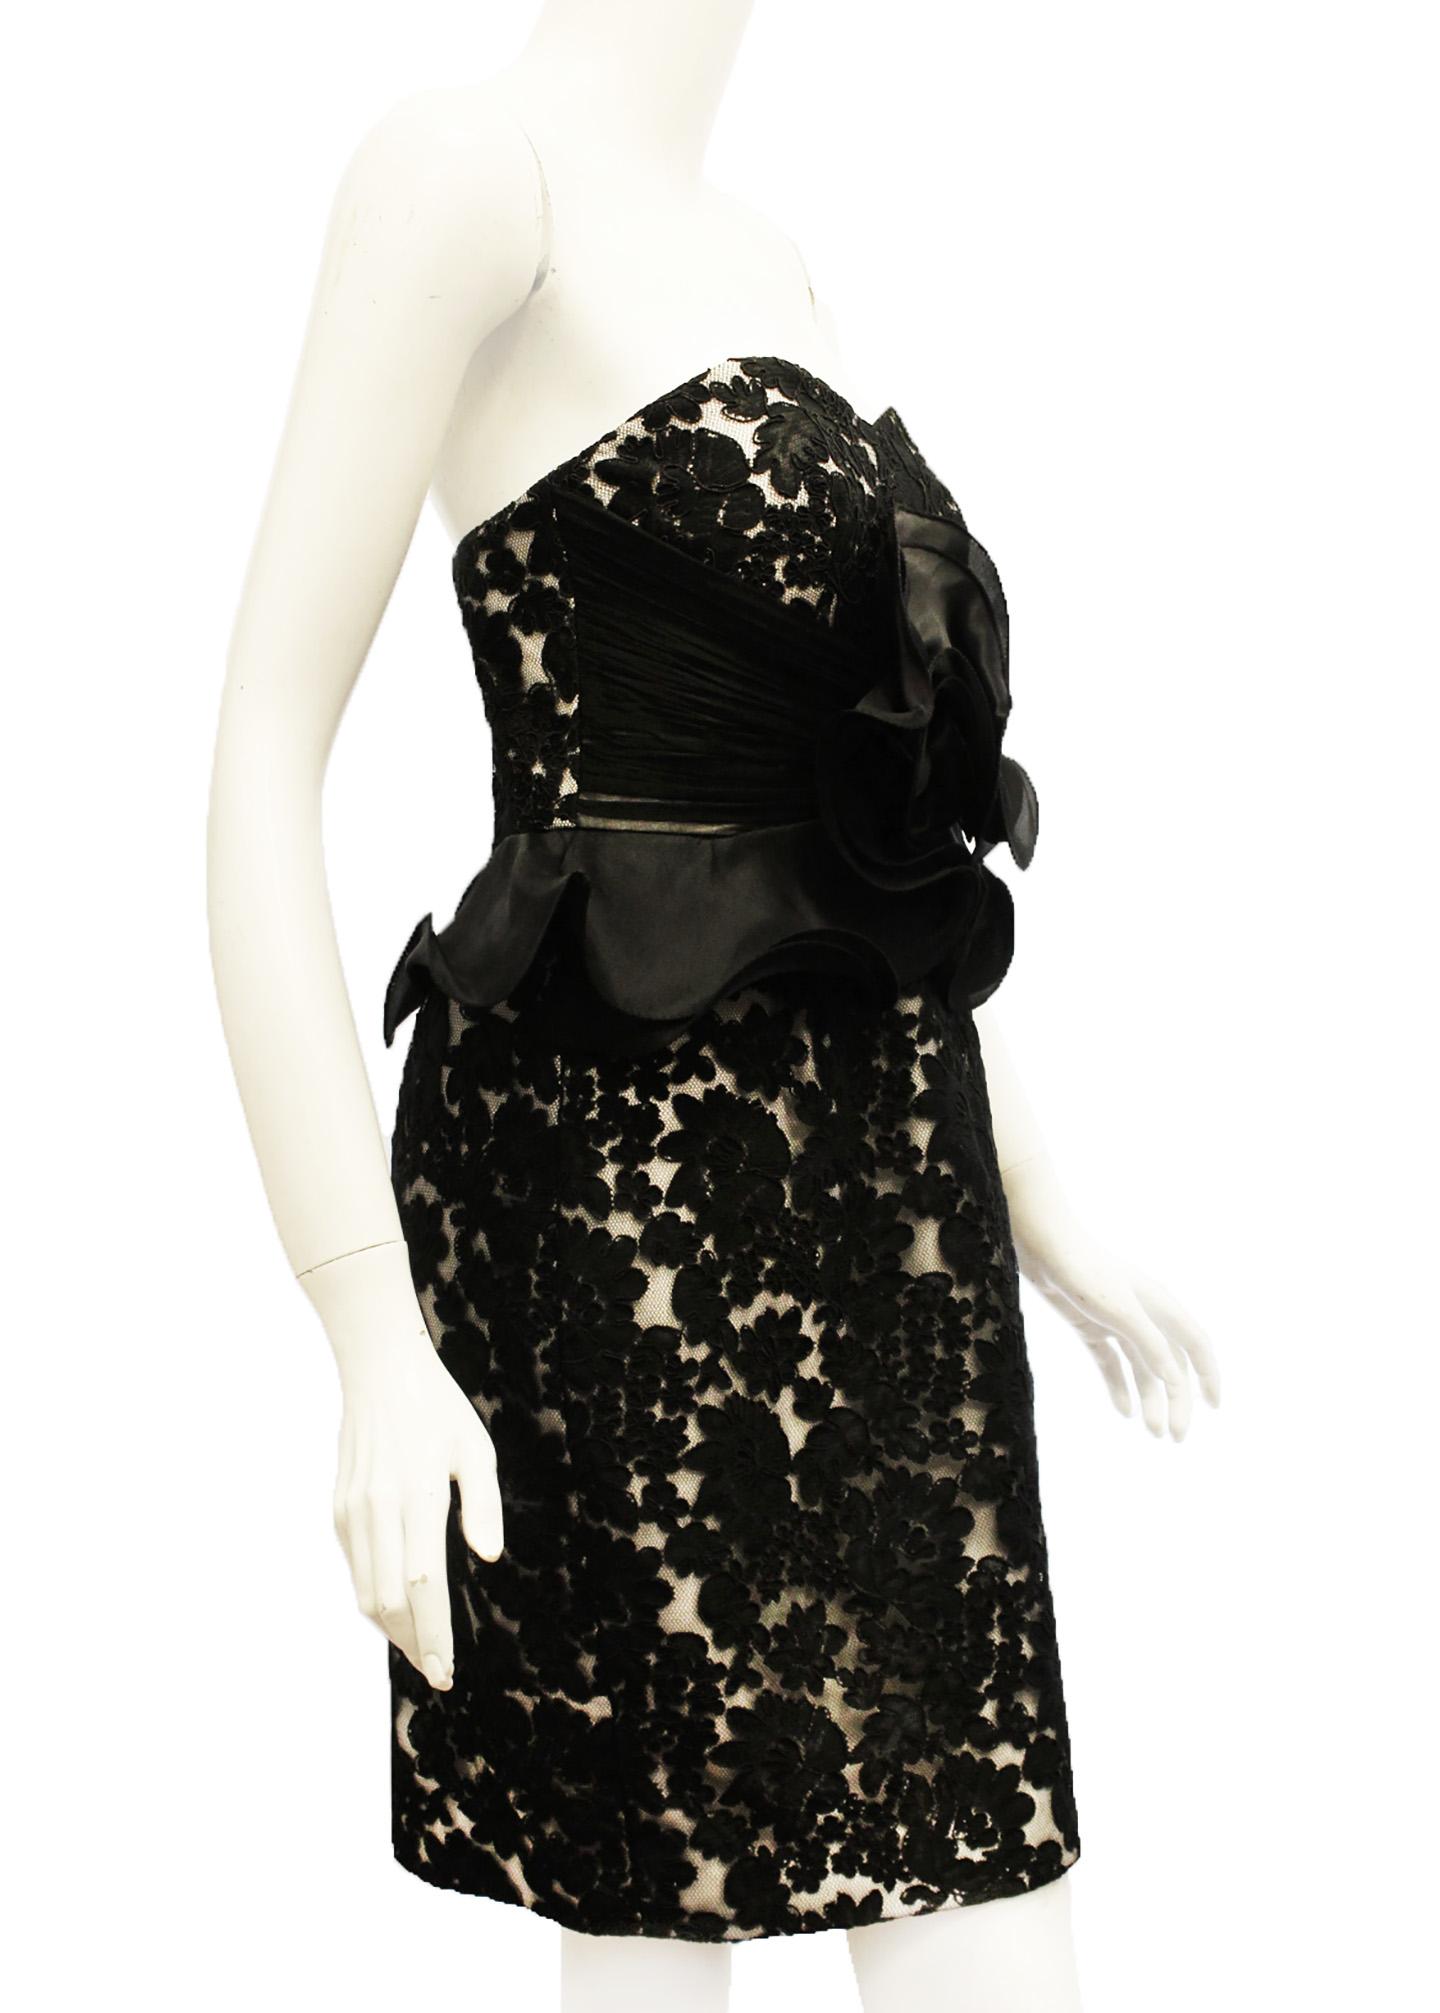 Marchesa Notte black lace strapless dress with white lining giving this cocktail dress a dramatic look. At front, on bodice a flower like ruffle in black continuing with peplum like ruffle at waistline.  Perfect for any special occasion!  The